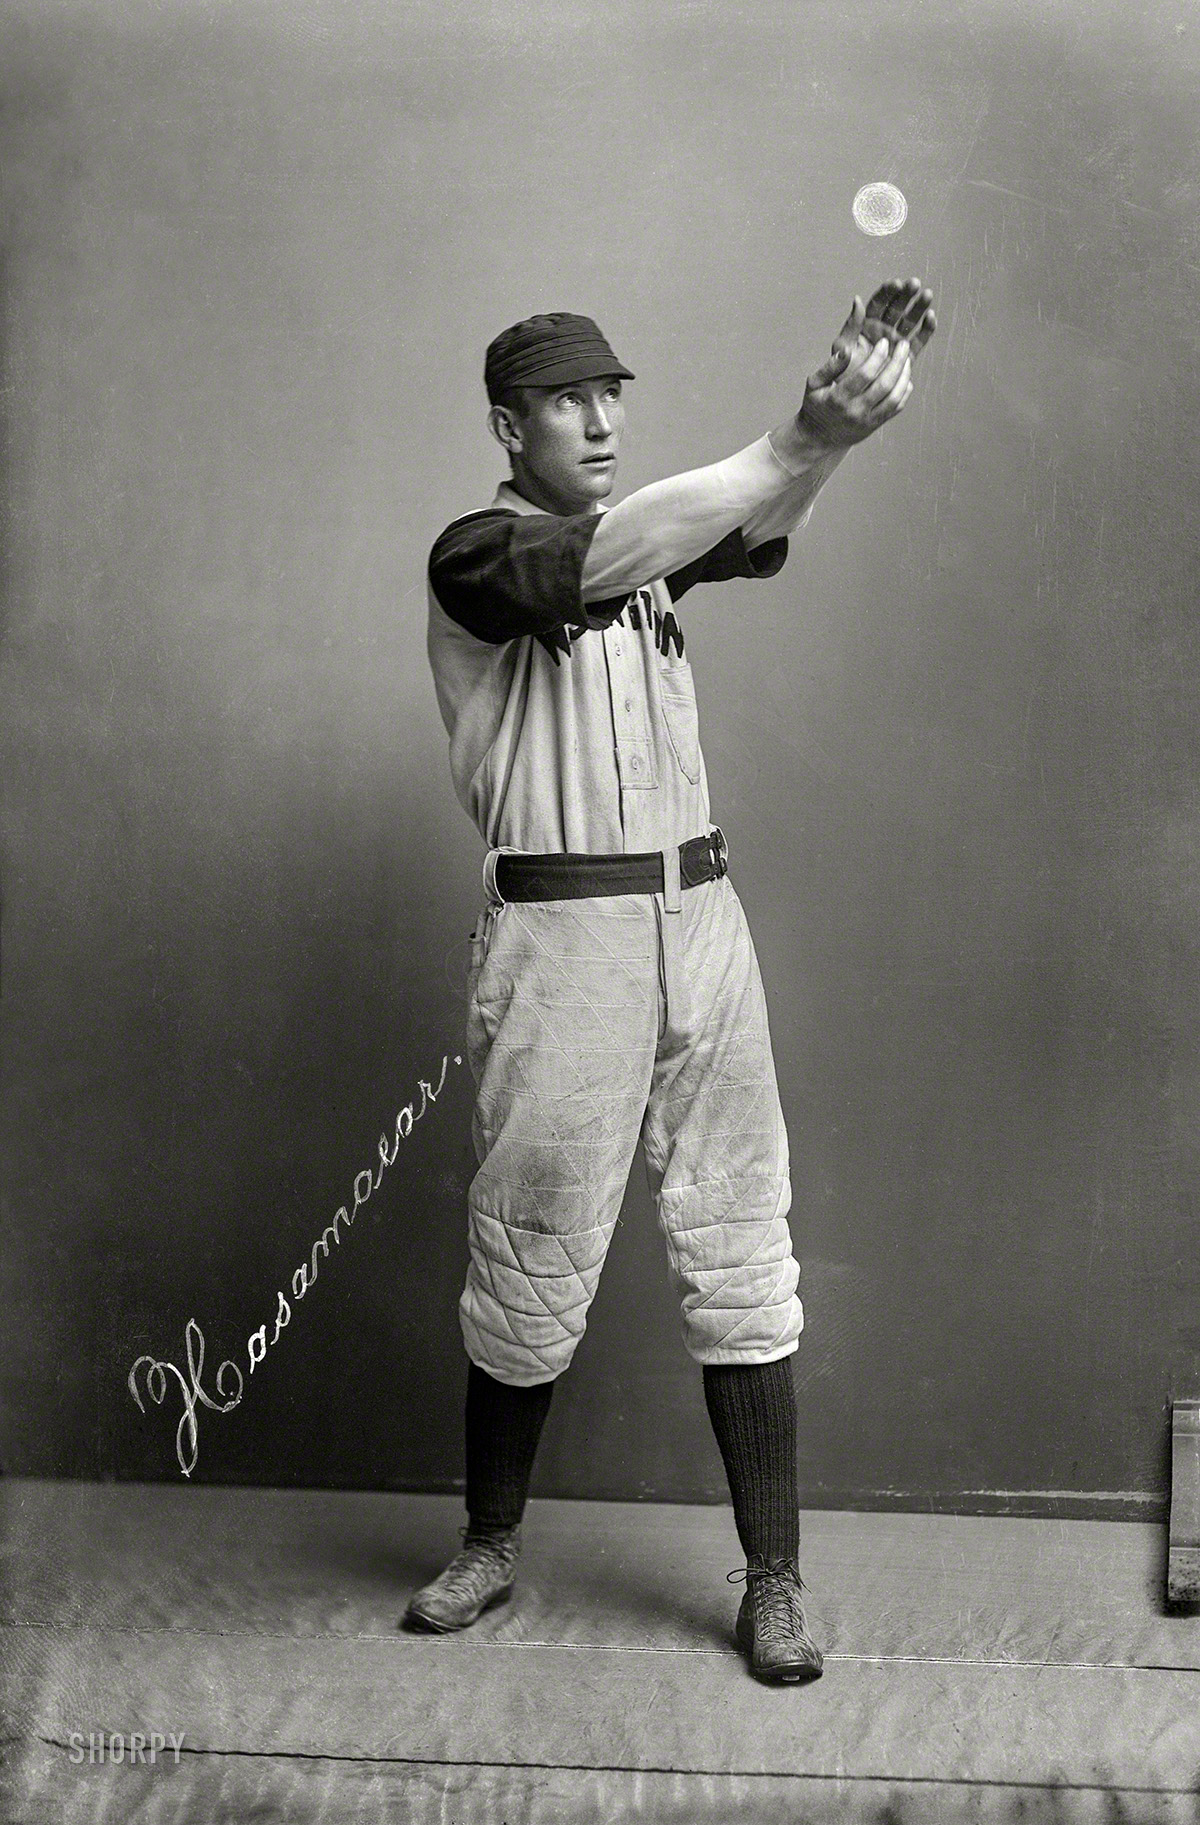 Circa 1895. "Hasamaear, Washington baseball." Fan favorite William "Roaring Bill" Hasamaear keeps his eye on the ball, such as it is. 5x7 inch glass negative from the C.M. Bell portrait studio in Washington, D.C. View full size.